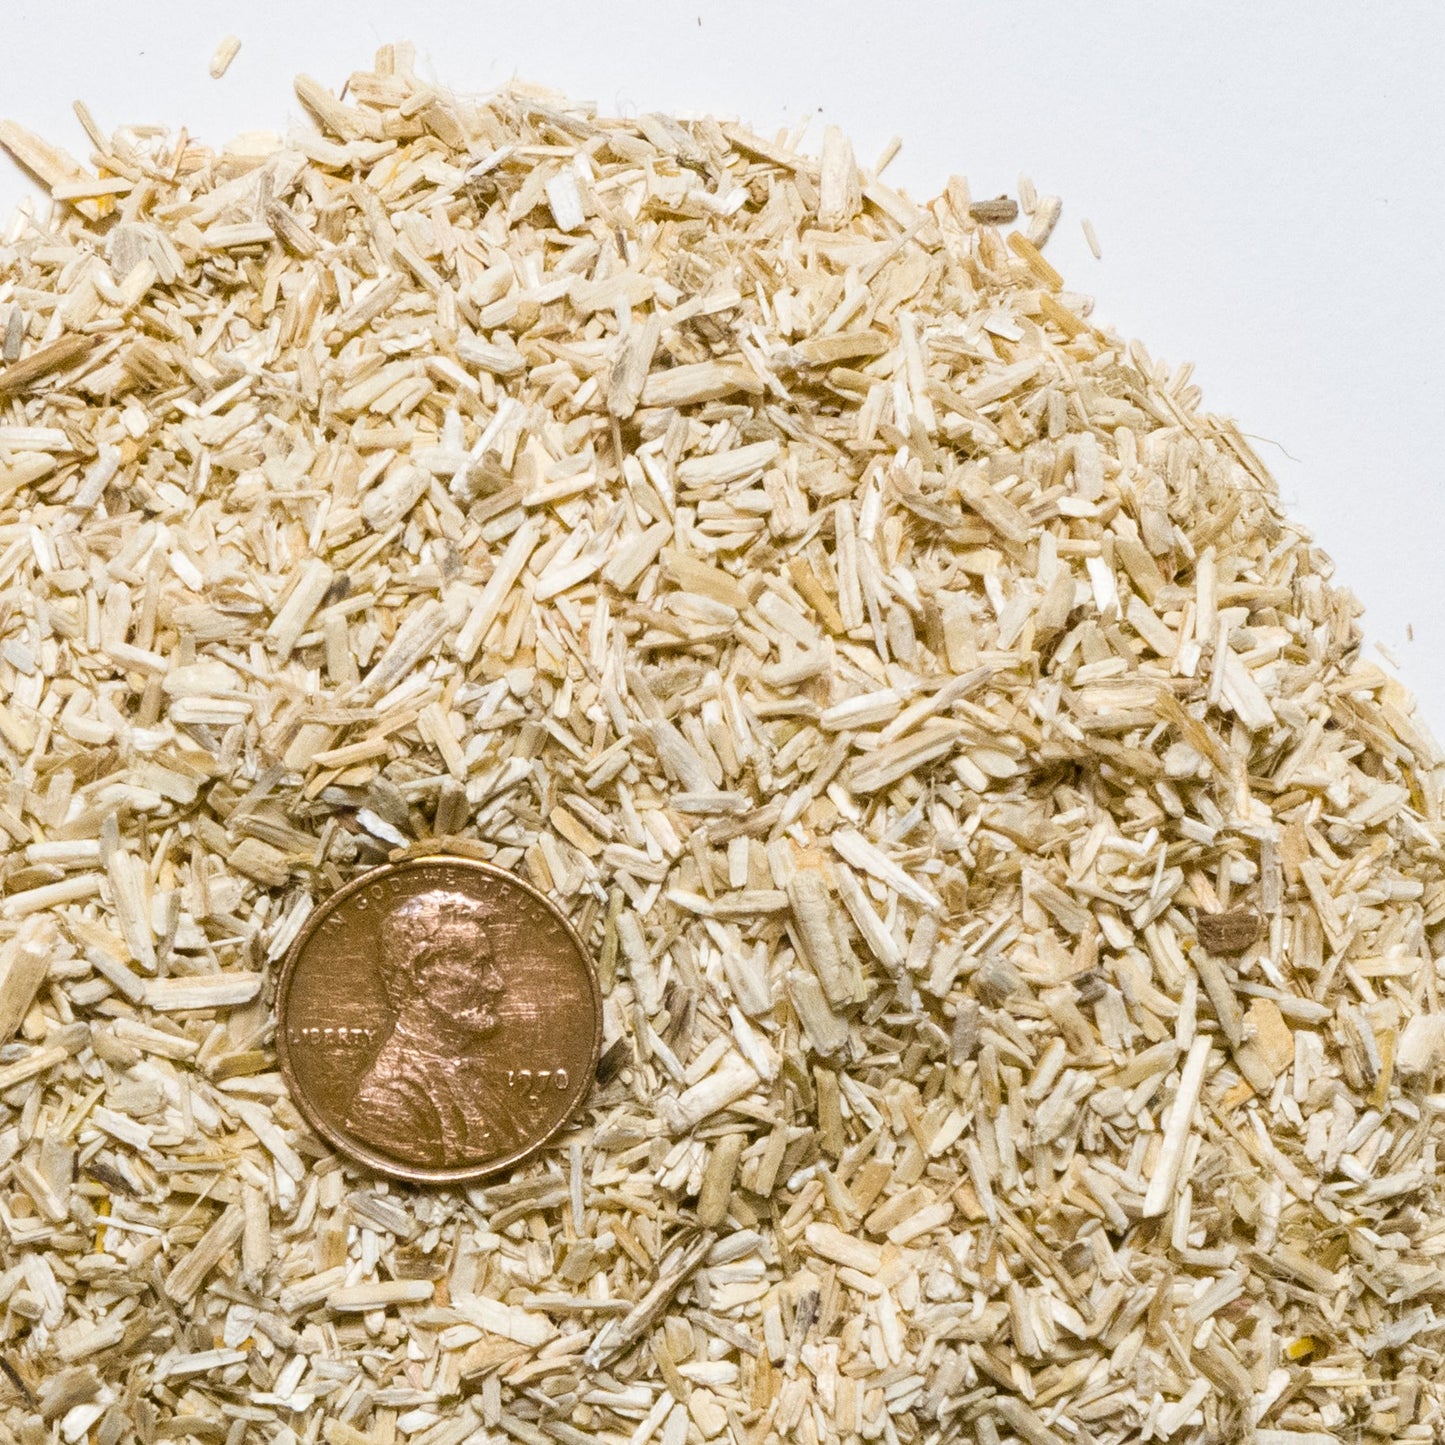 A size comparison of a USA penny on top of a mound of Tiger Fiber hemp animal bedding.